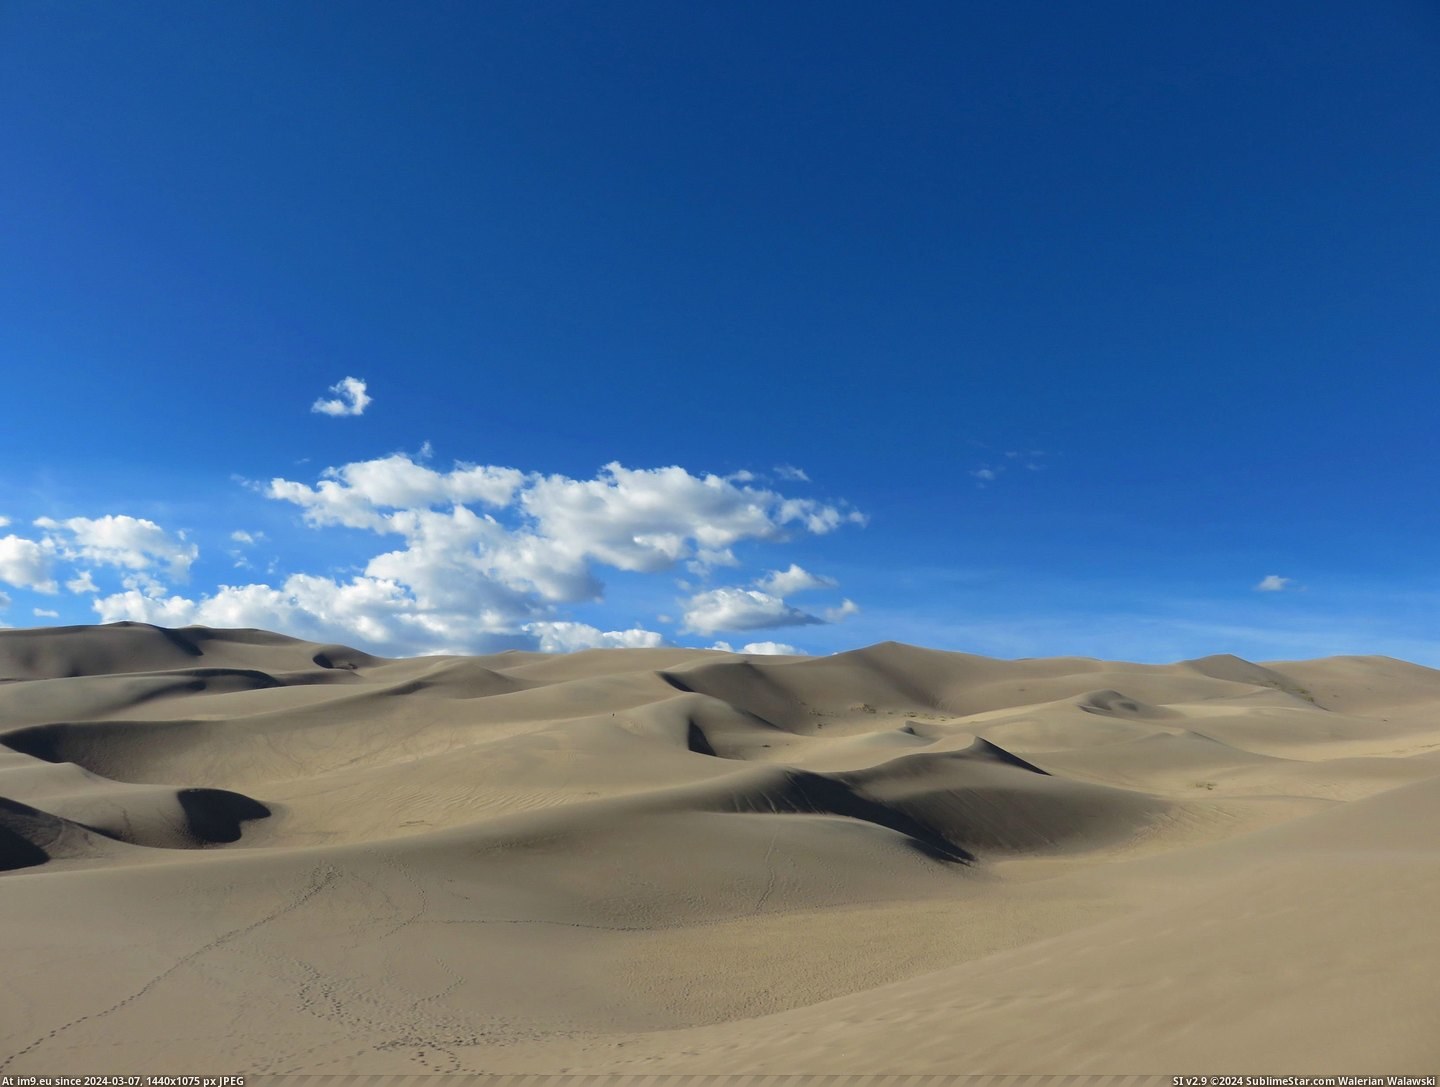 #Great #Colorado #Dunes #3264x2448 #Sand [Earthporn] Great Sand Dunes, Colorado. [3264x2448] Pic. (Image of album My r/EARTHPORN favs))